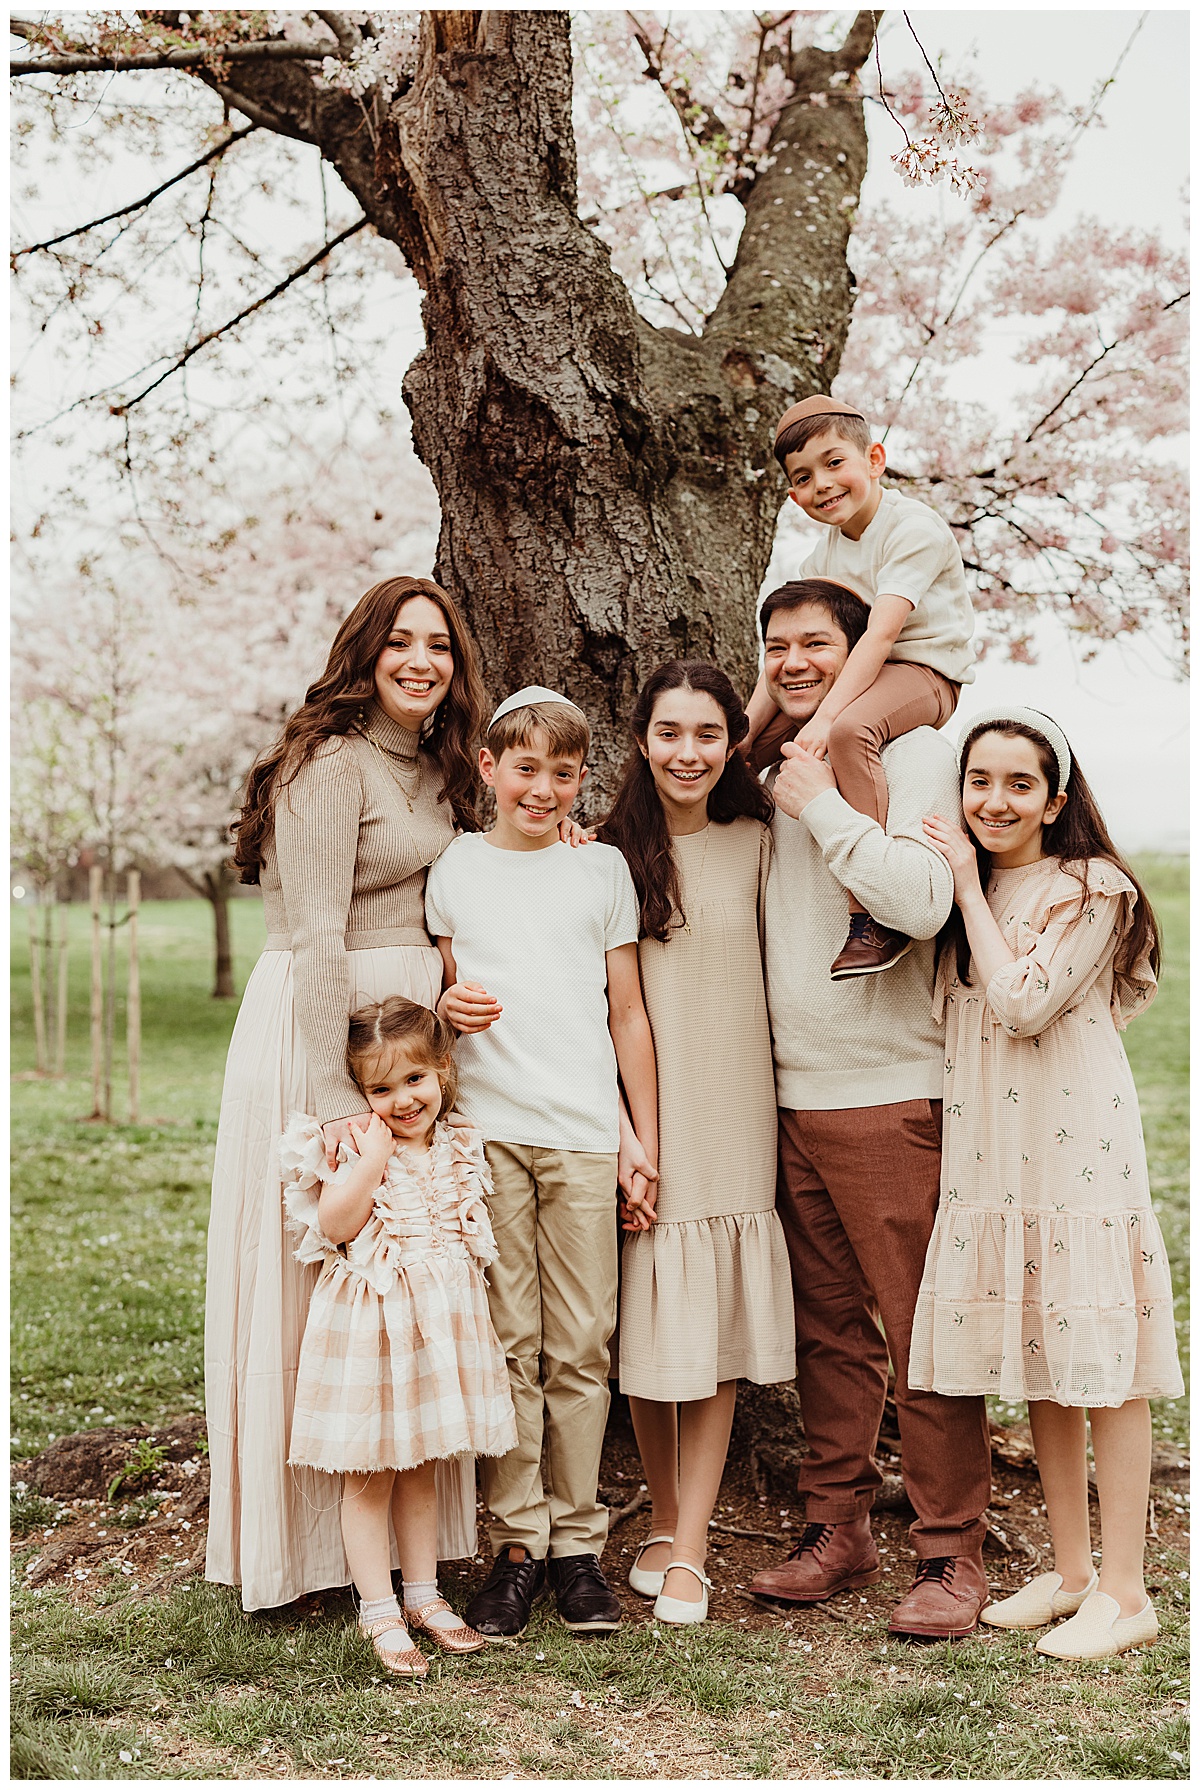 Gorgeous family stand close together for Cherry Blossom Family Photos